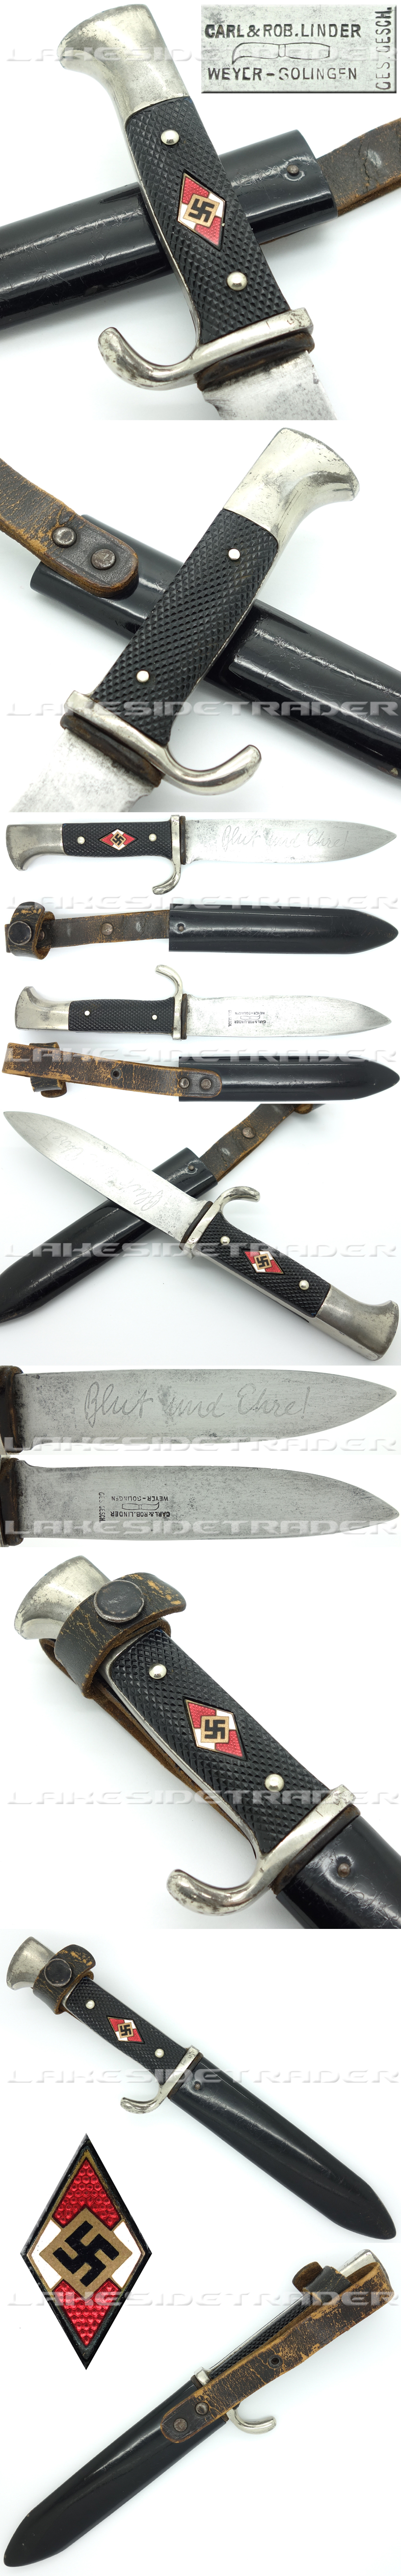 Early Hitler Youth Knife by Carl & Rob Linder